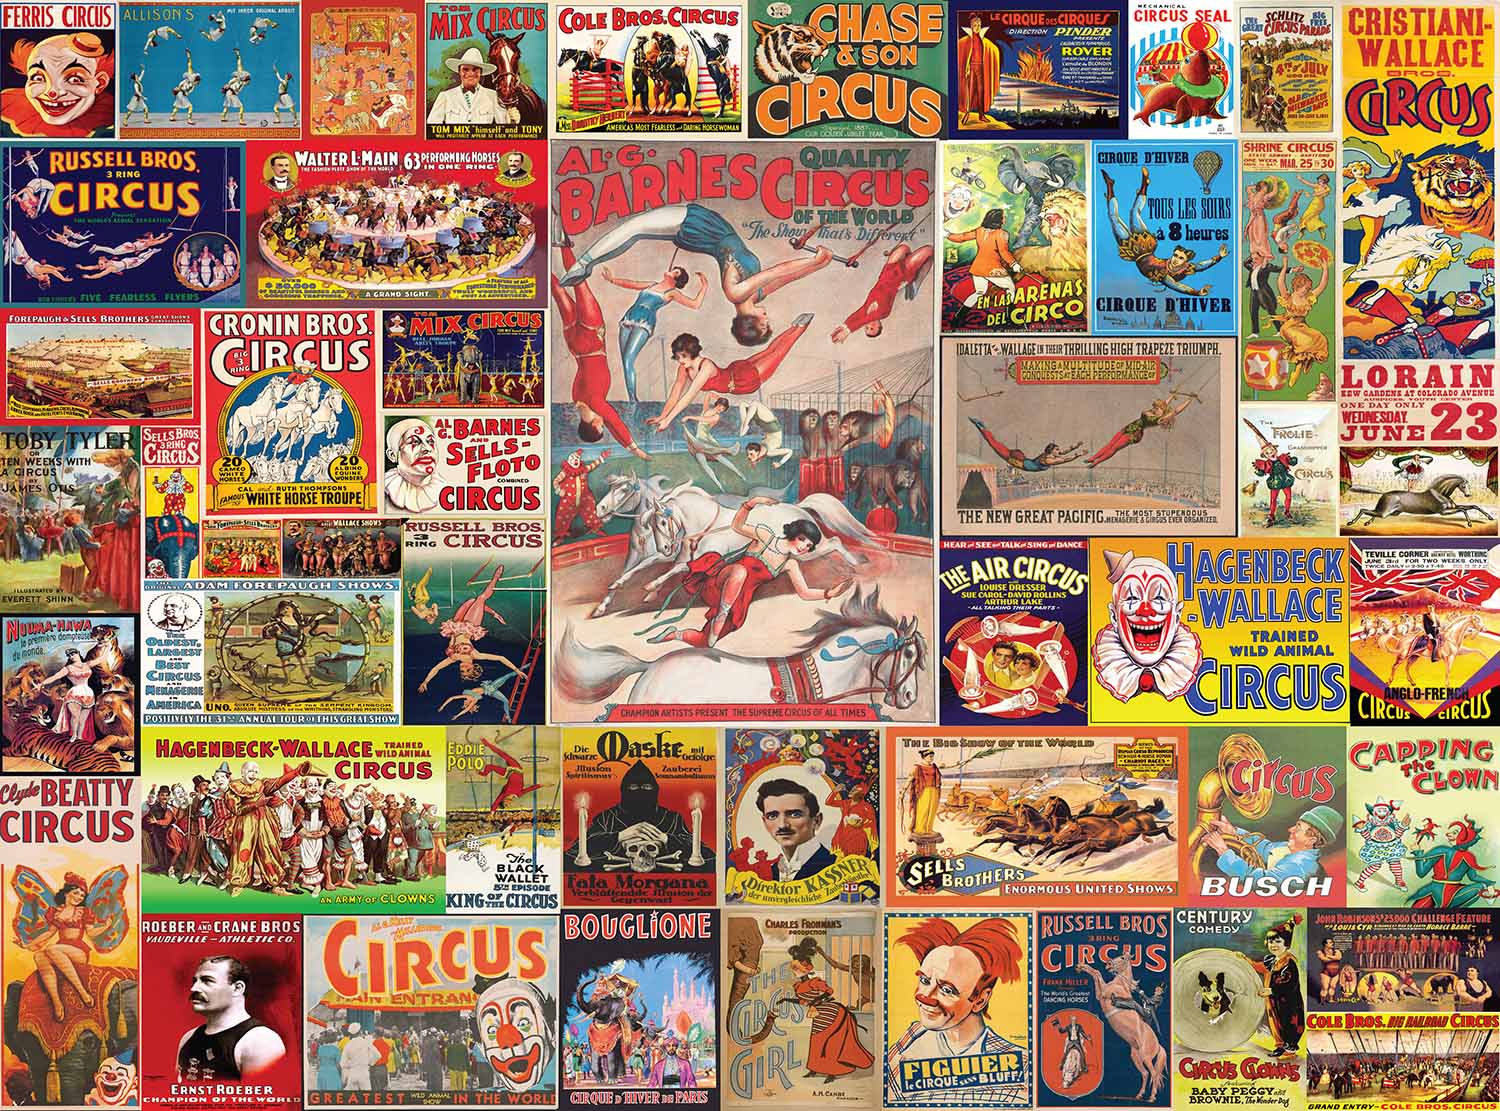 Circus is Back in Town Carnival & Circus Jigsaw Puzzle